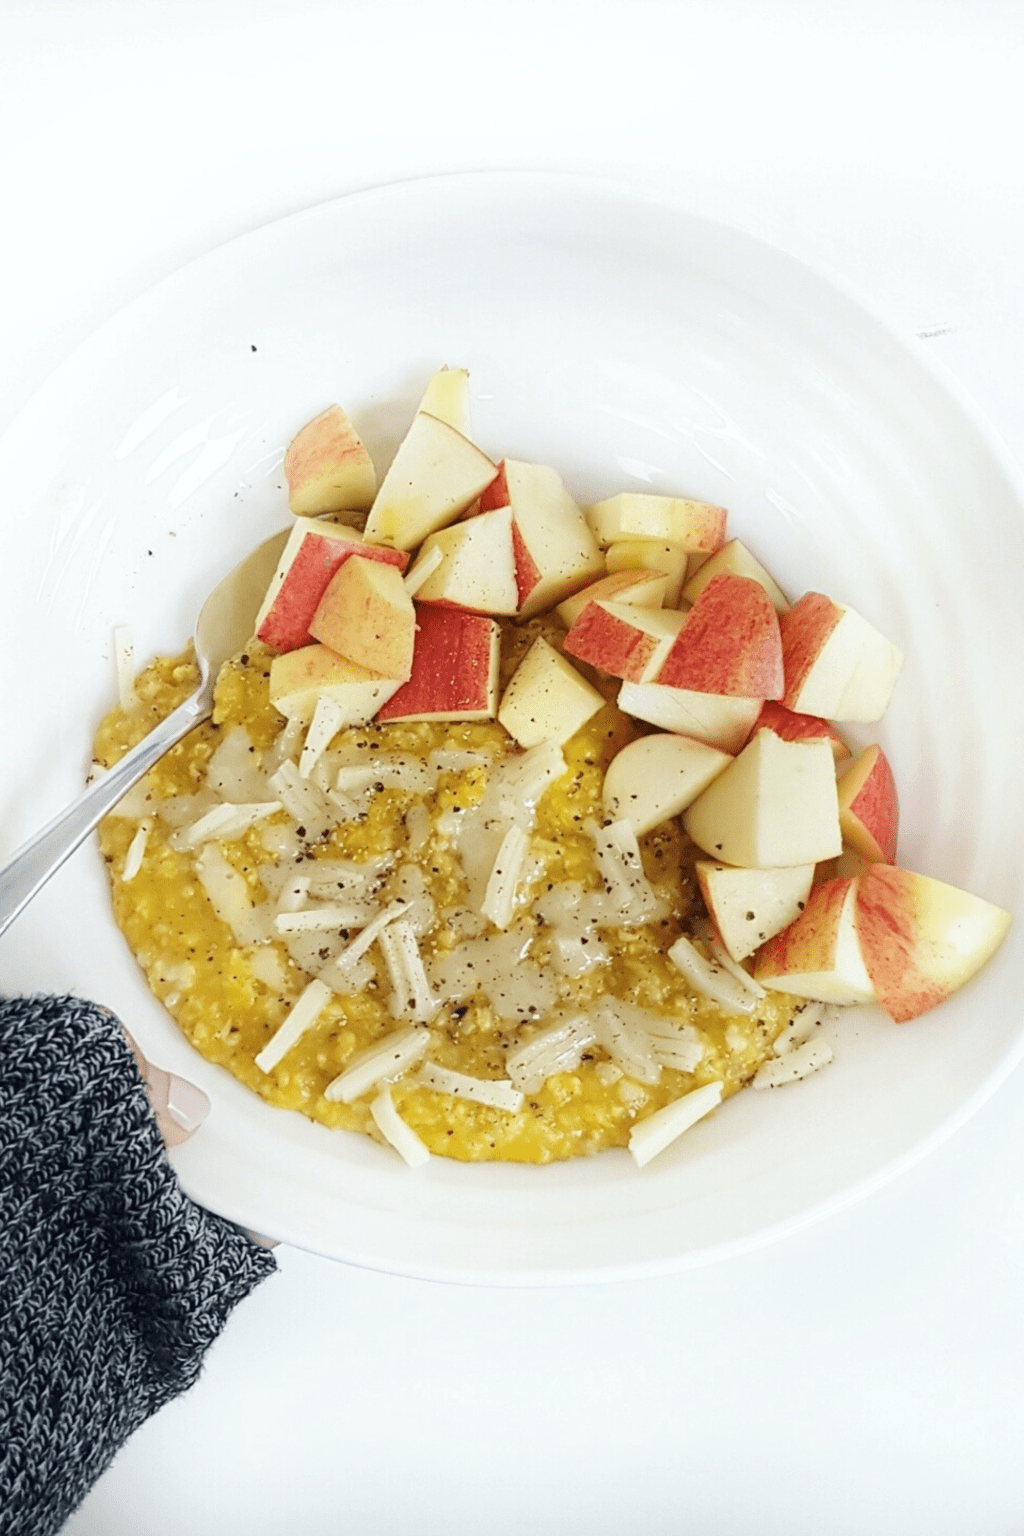 A hand slightly covered by a black sleeve is holding up a white bowl. In the bowl are golden oatmeal topped with diced apple and shredded white cheddar